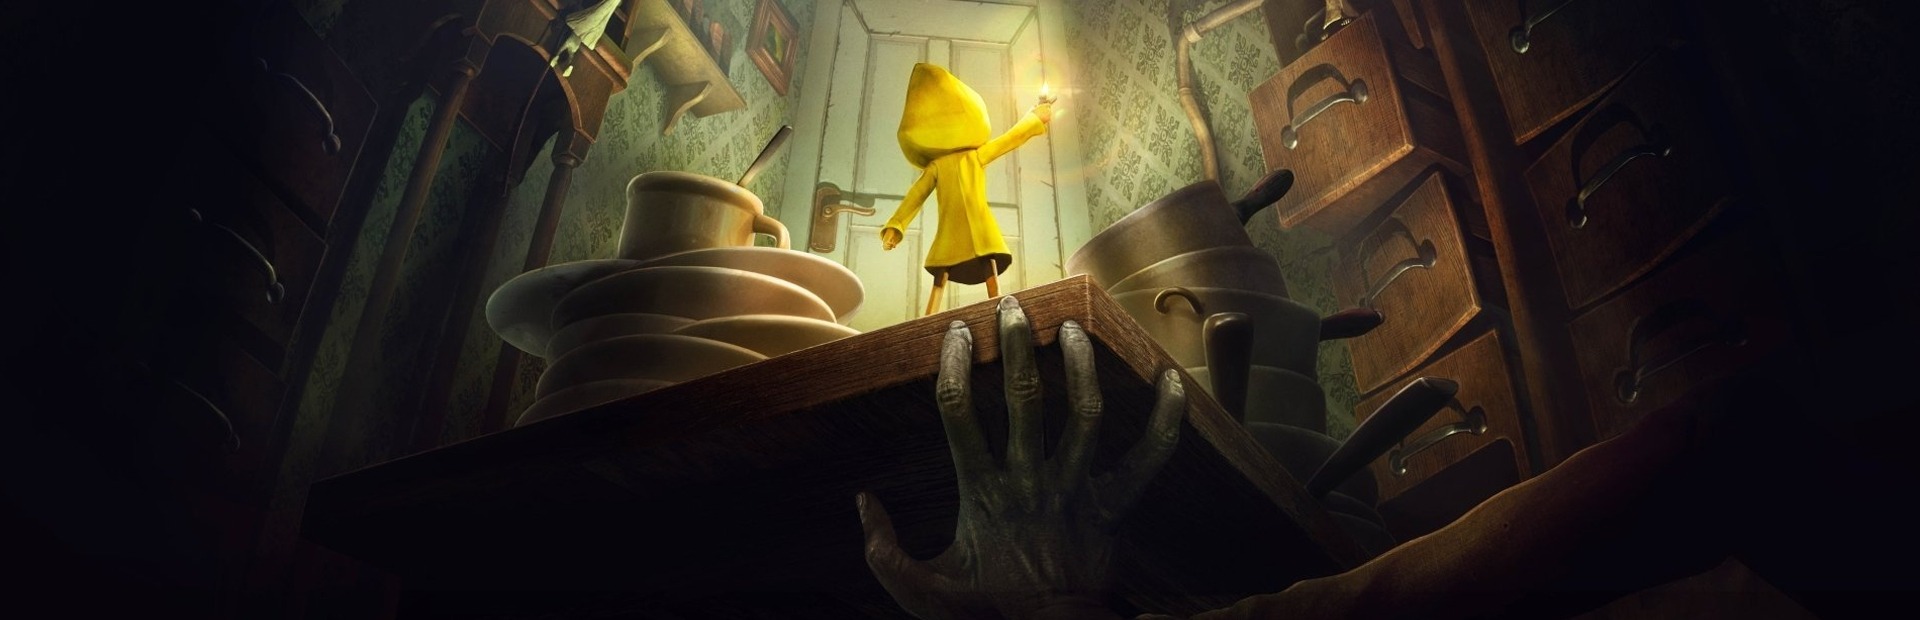 Little Nightmares (Complete Edition)